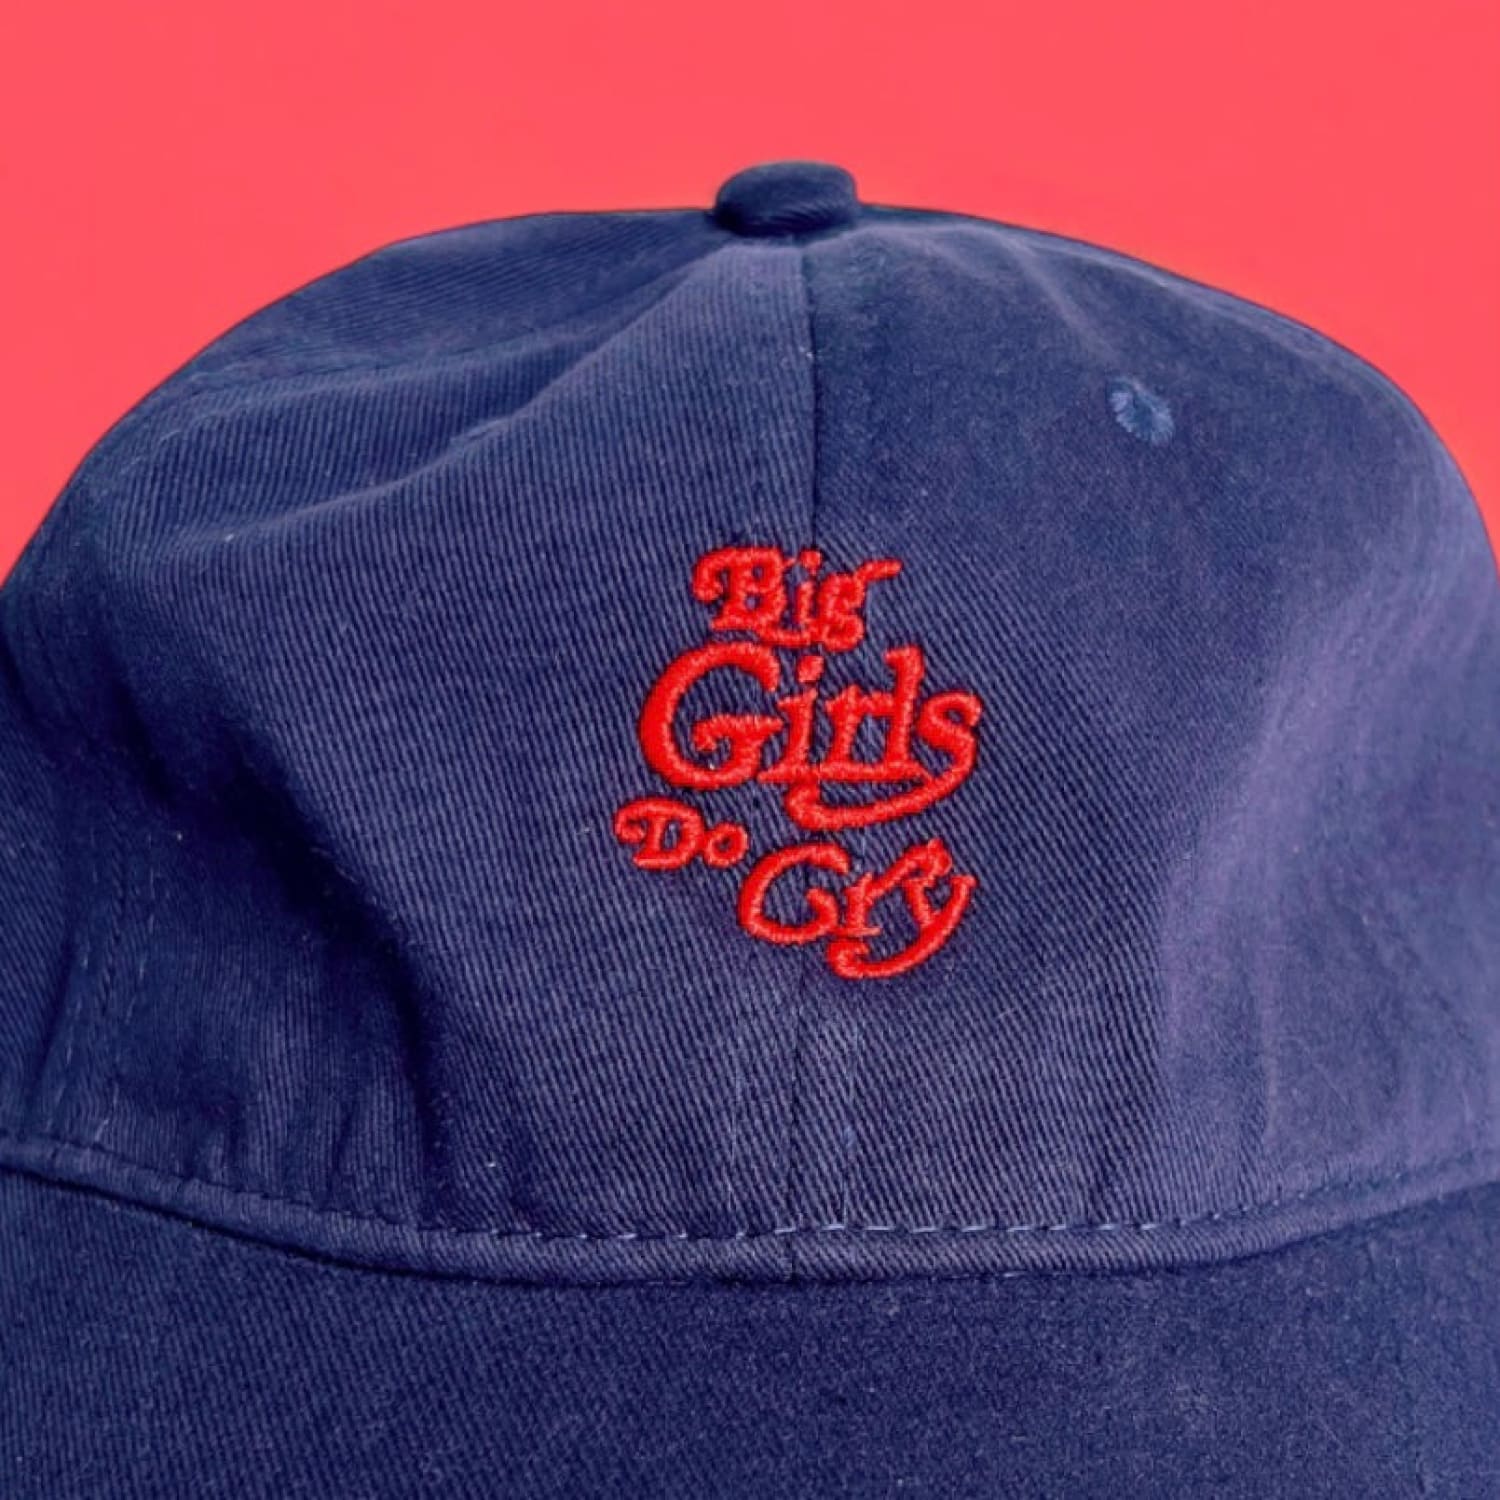 Big Girls Do Cry Dad Hat Dad Hat - Groupbycolor - Party